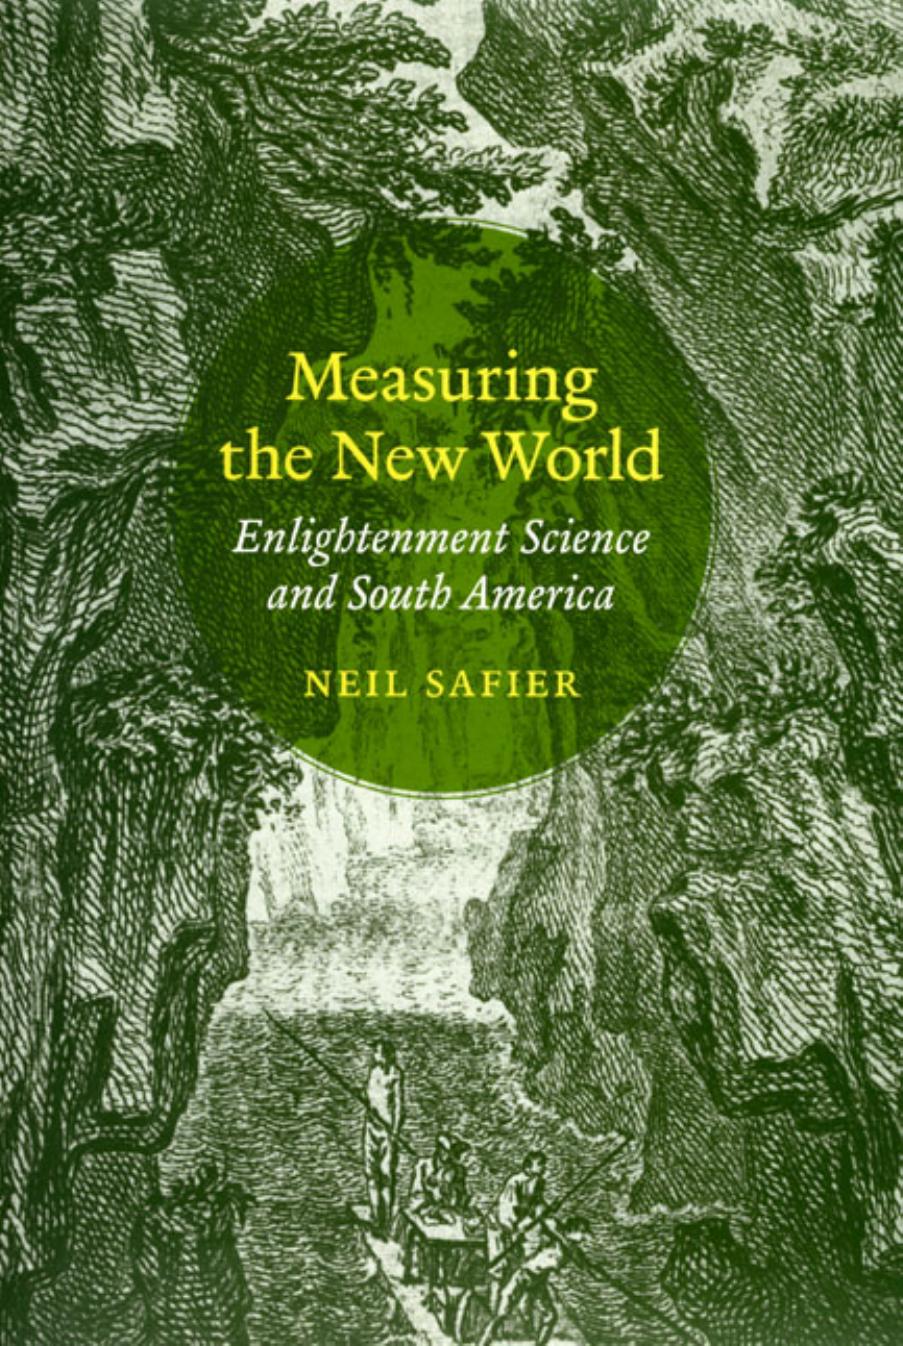 Measuring the new world: enlightenment science and South America by Neil Safier